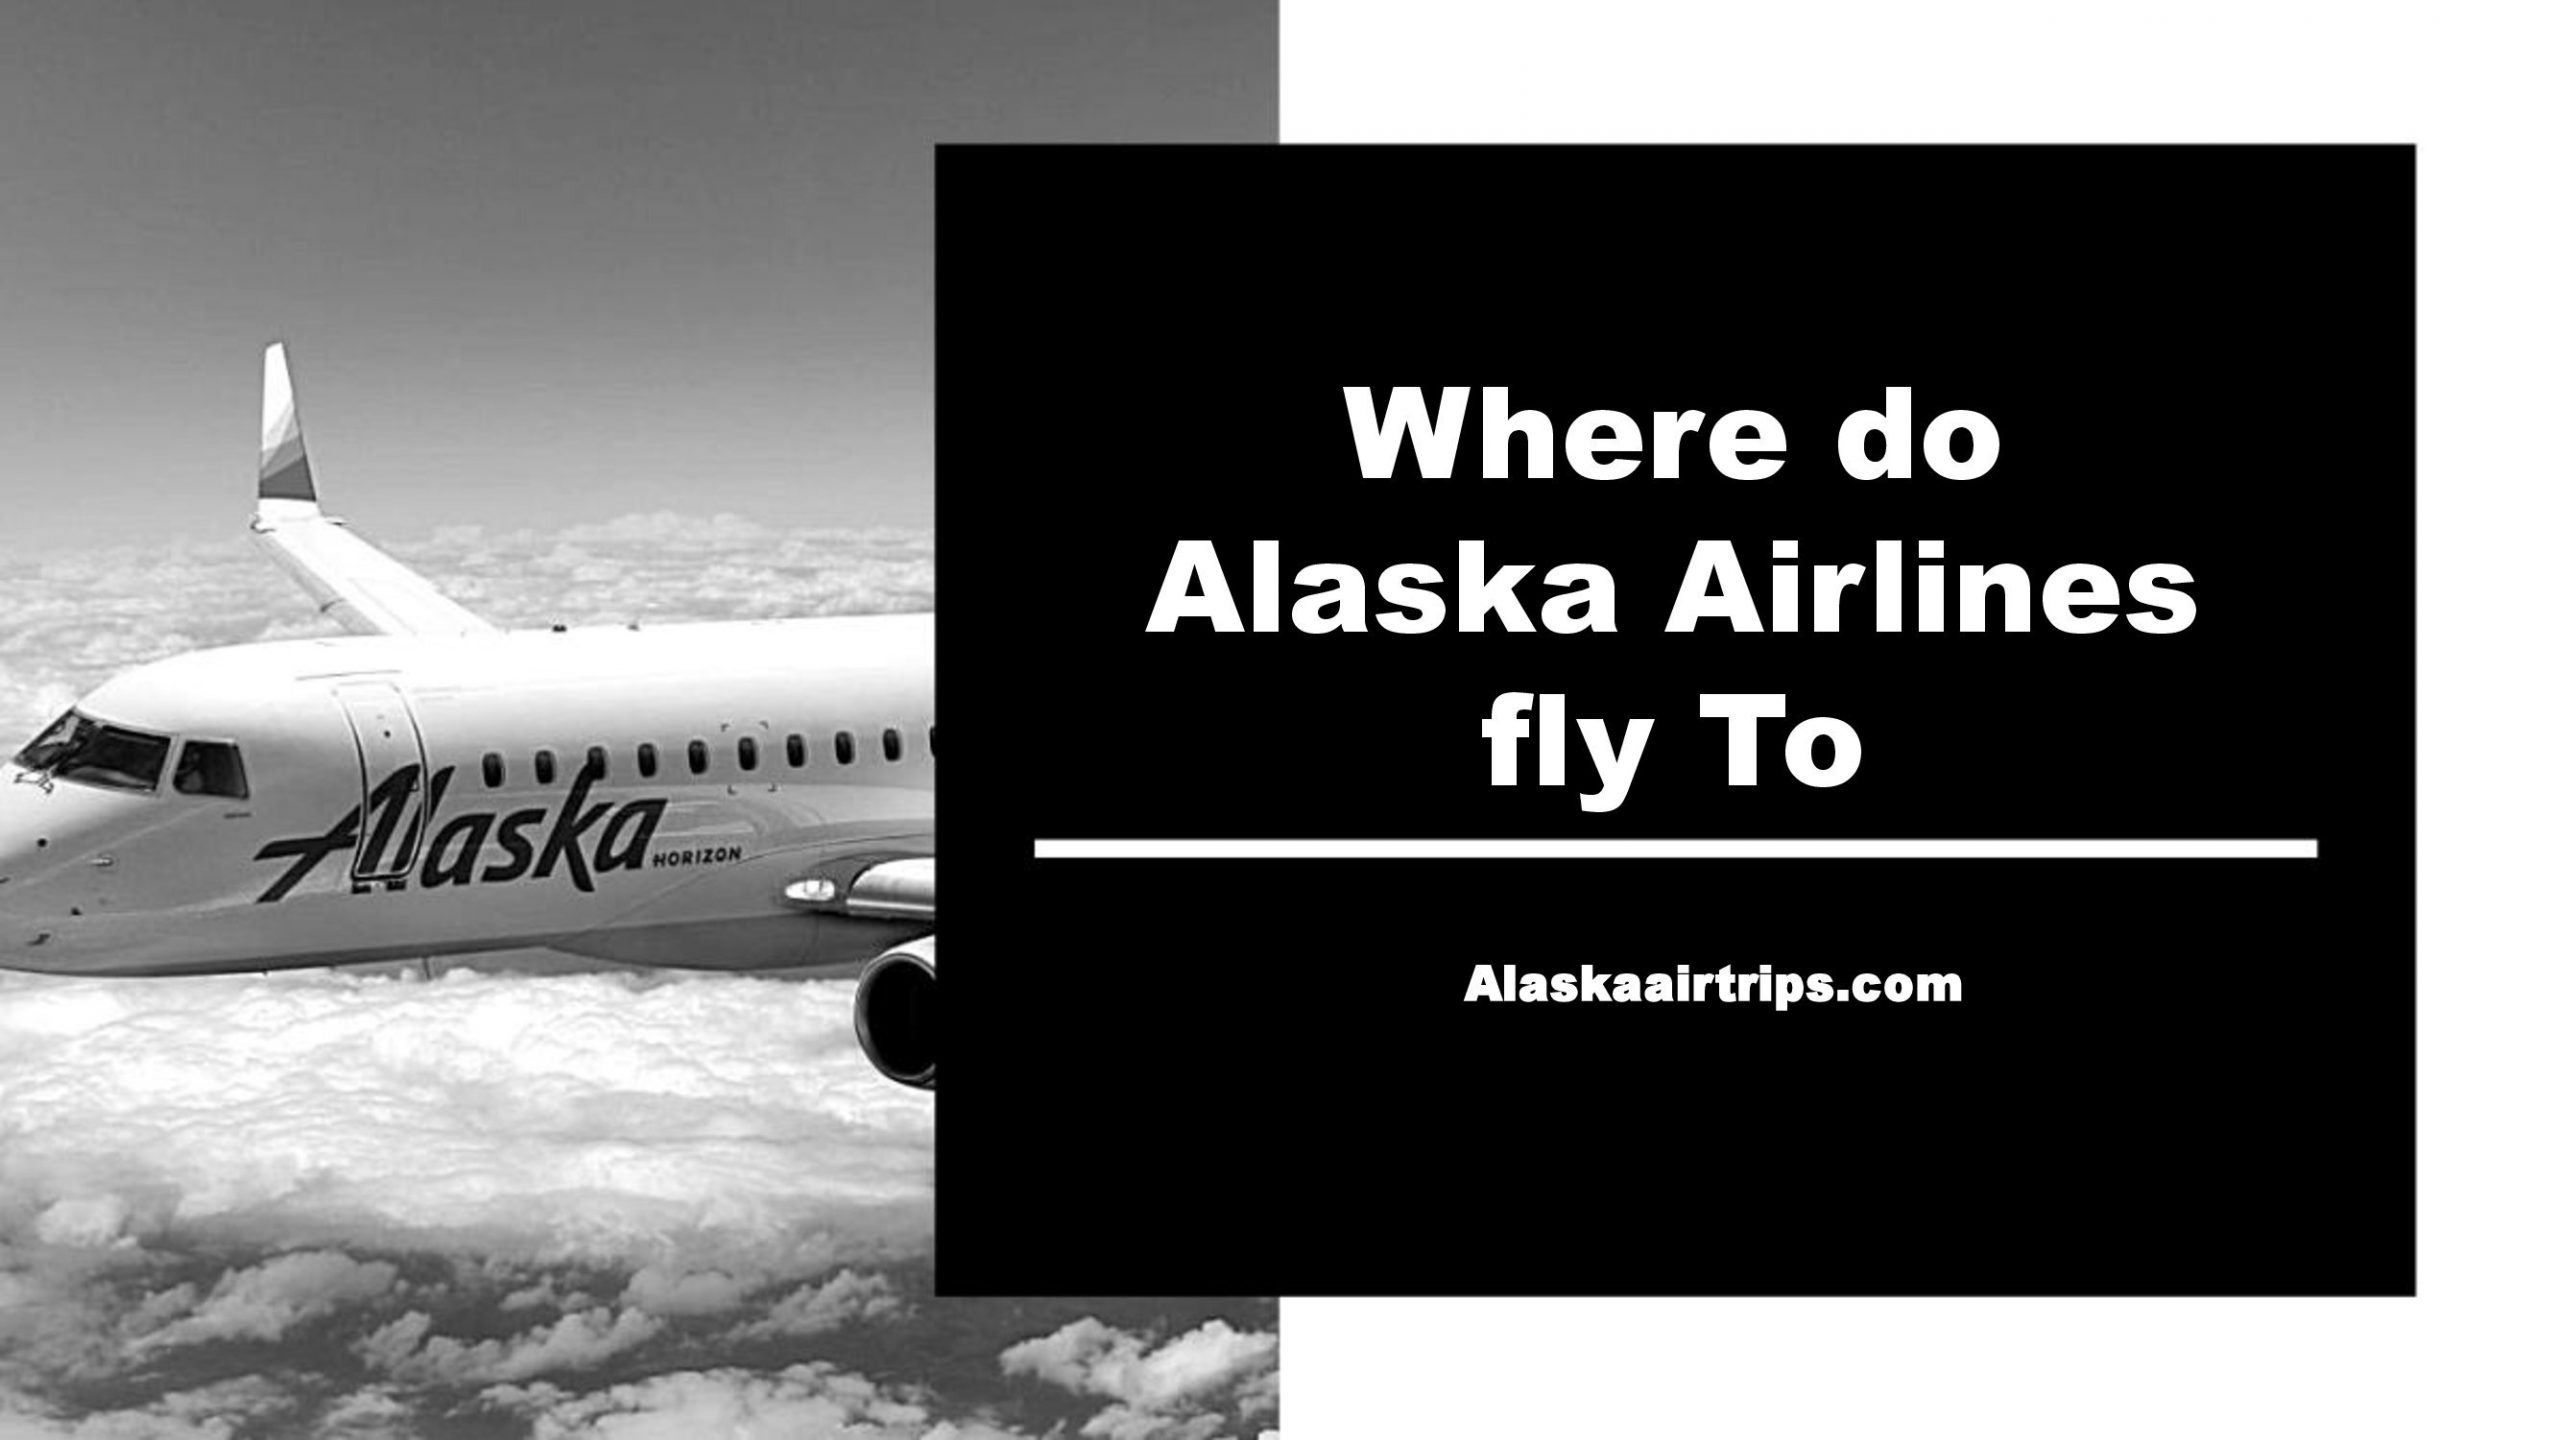 Where do Alaska airlines fly to?